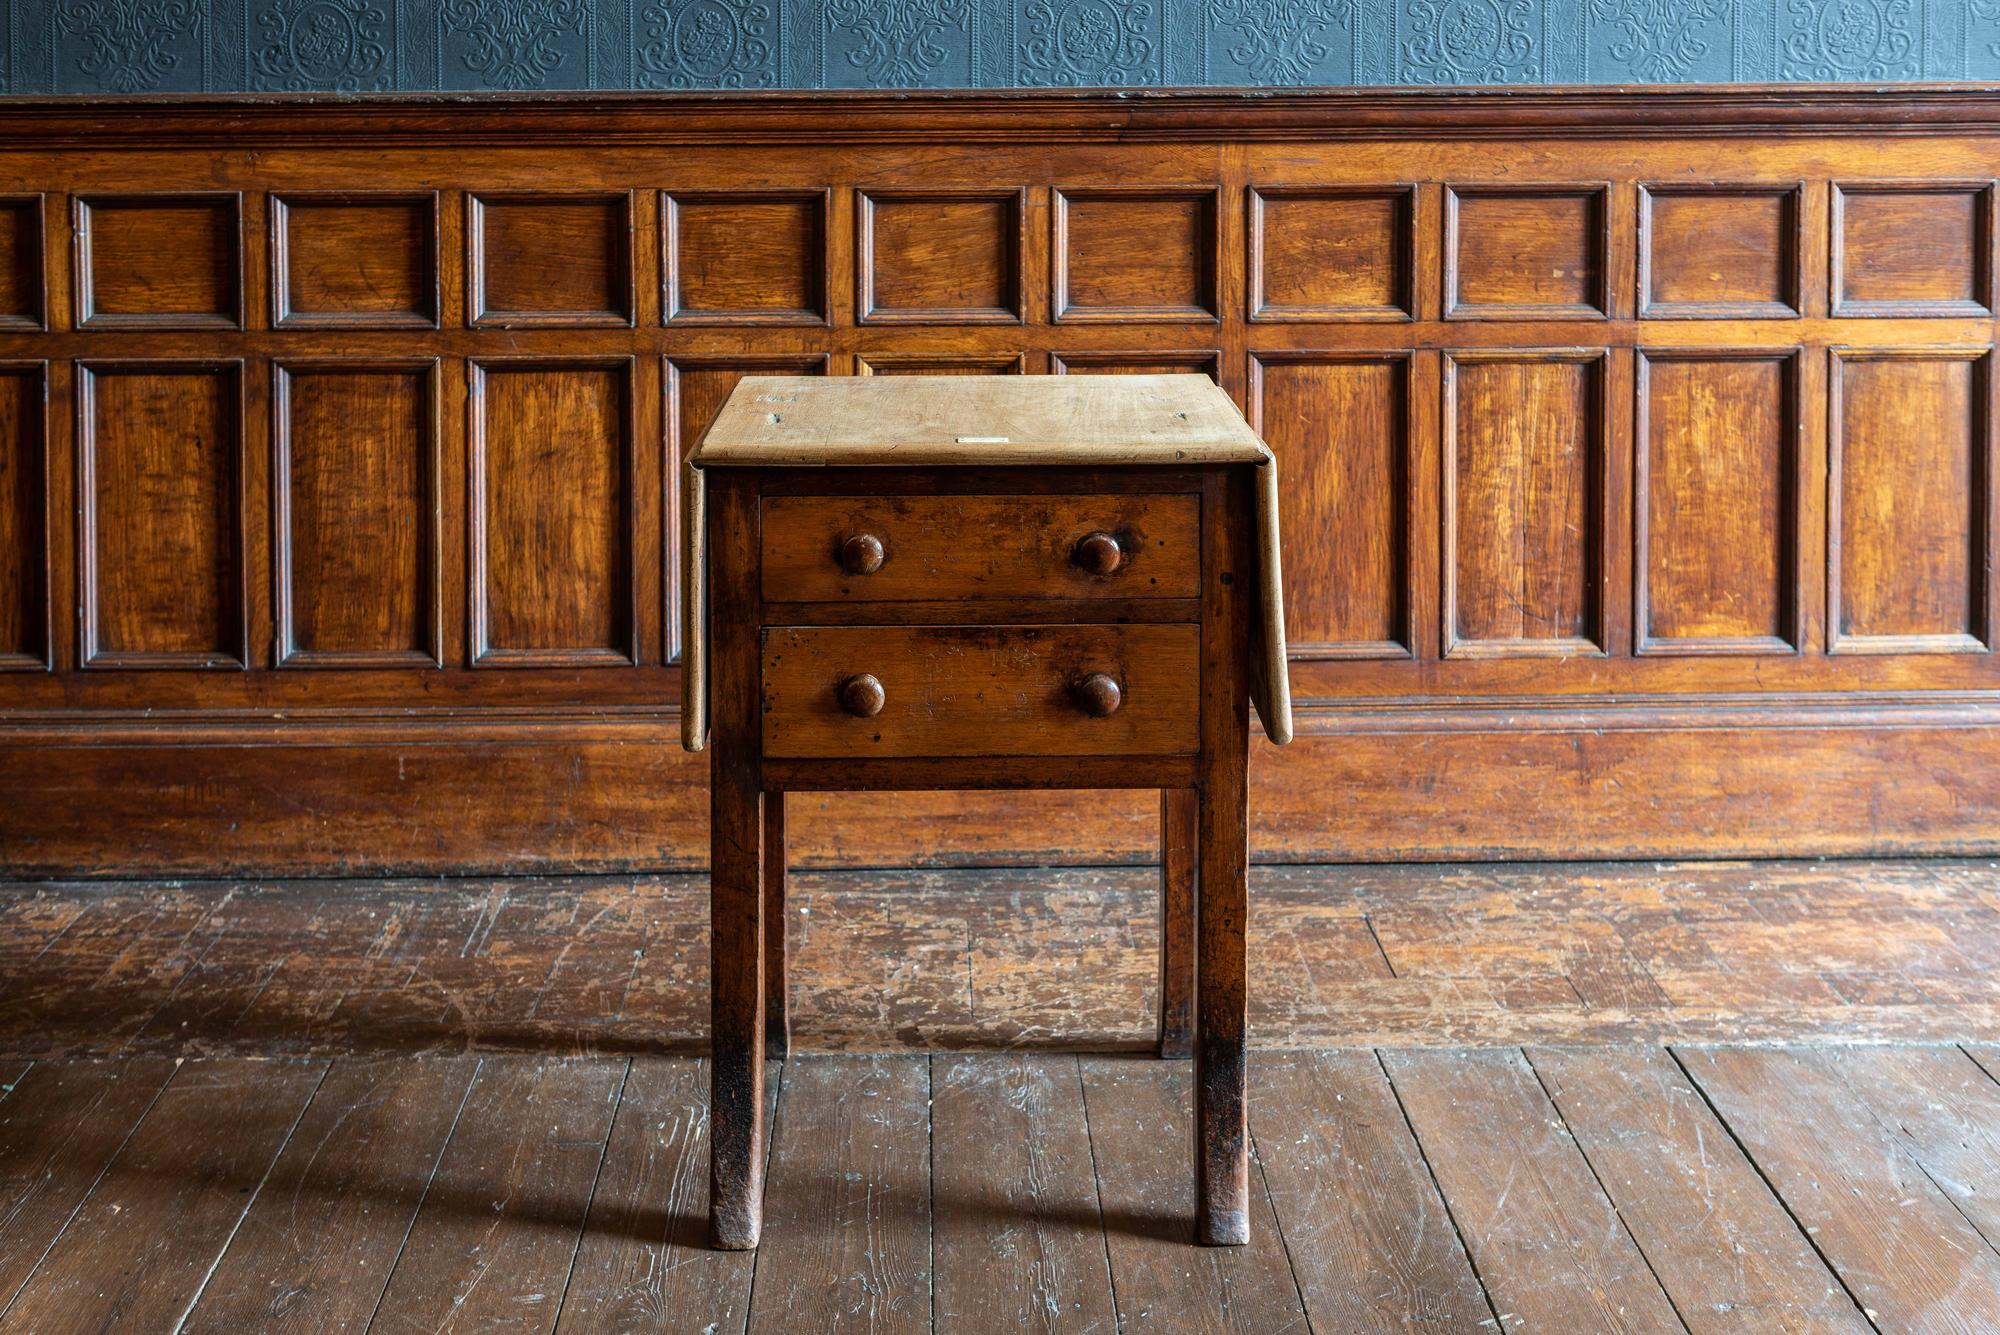 Mahogany printers table 'Waterlow & Sons London'
circa 1876.

Mahogany with bleached top and sliding table support brass pulls. Makers plate to the table edge and original finish to the dovetailed drawers and legs.

Waterlow and Sons Limited